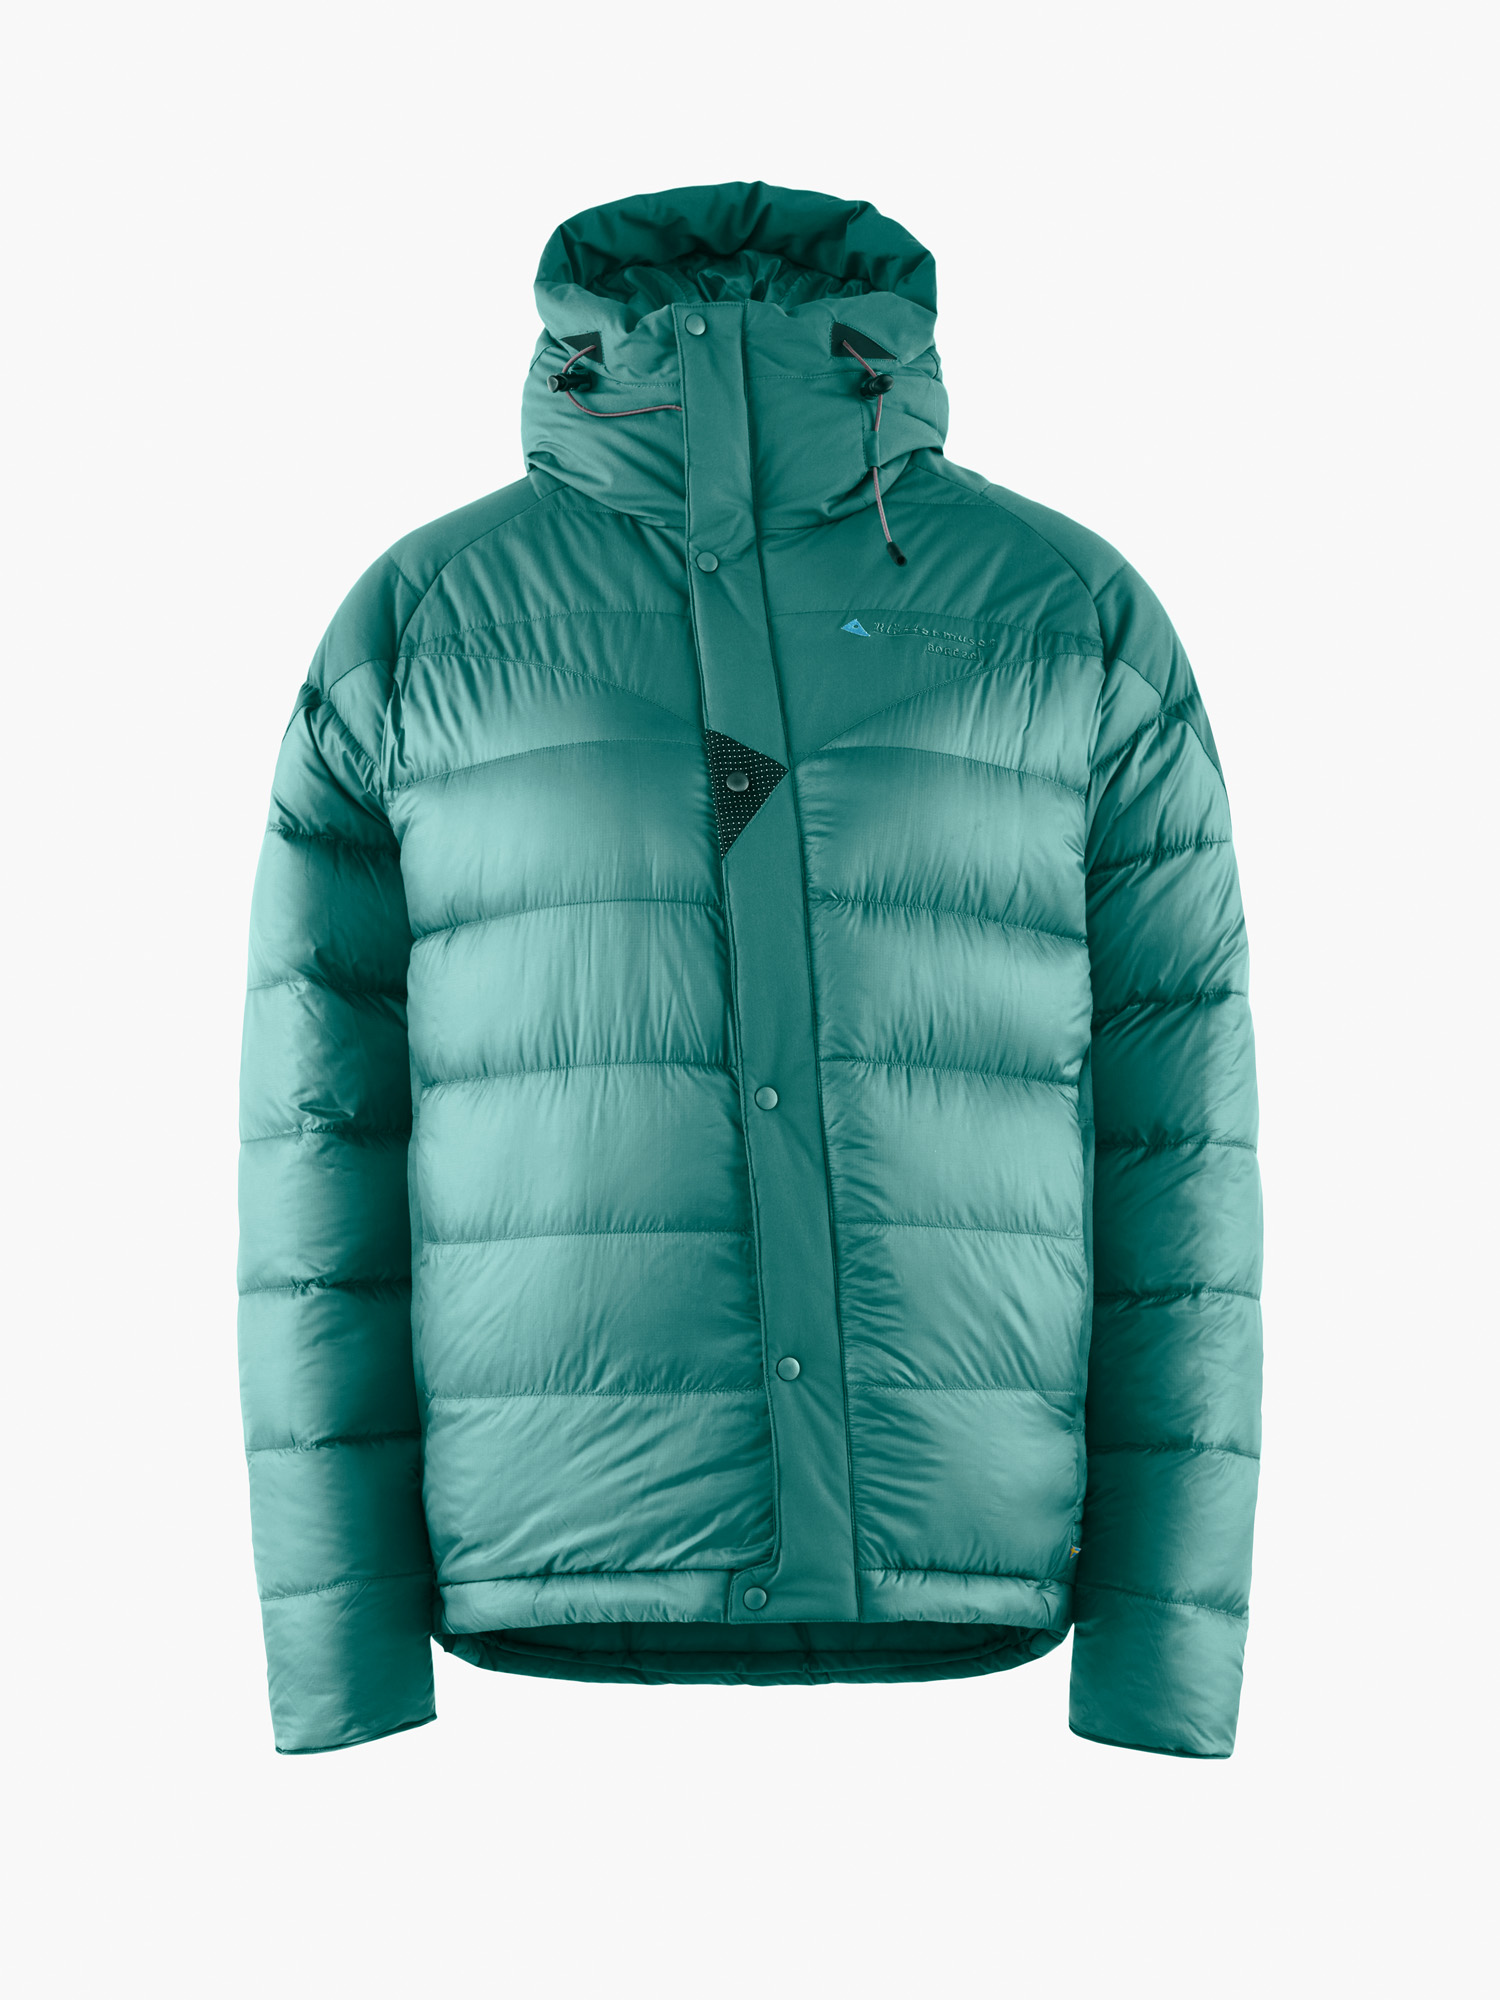 Bore 2.0, Unisex Down Jacket in green